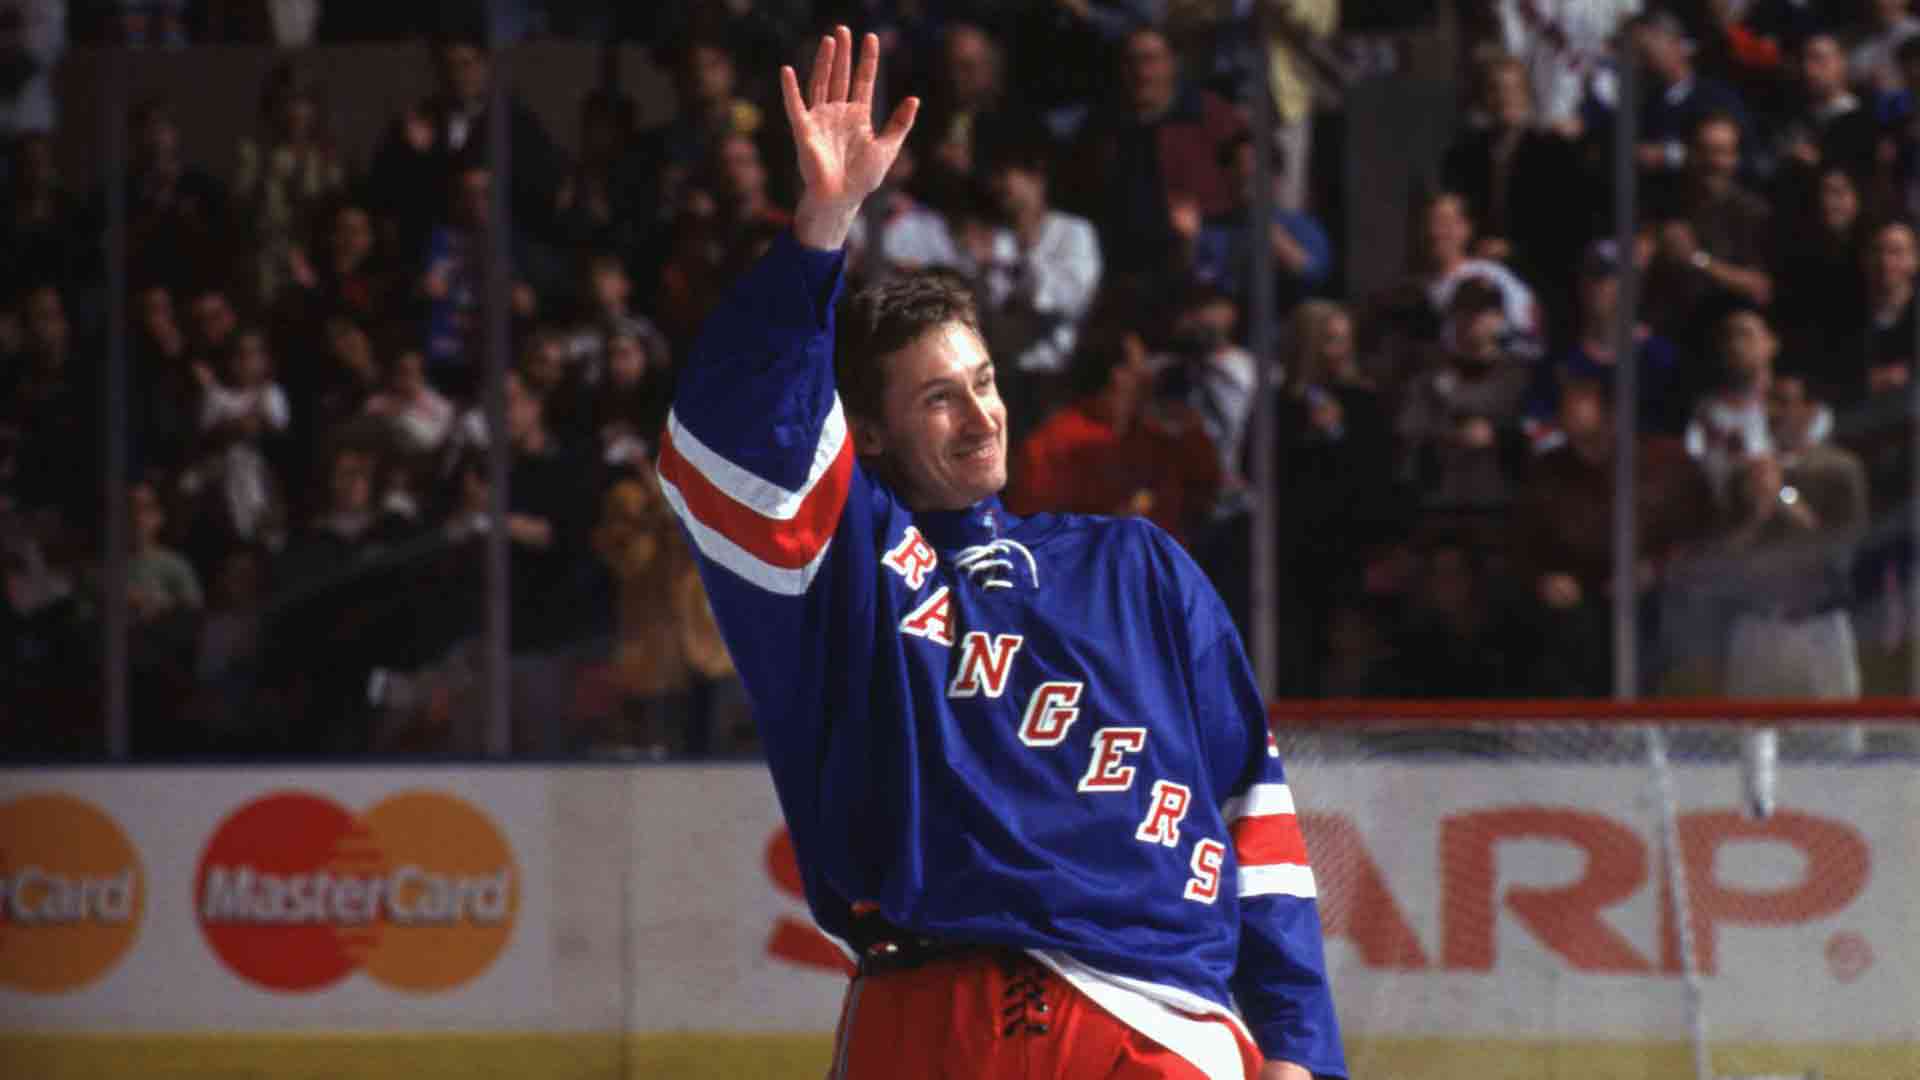 Wayne Gretzky Signed, Game-Worn Rookie Jersey Sells for $478,800